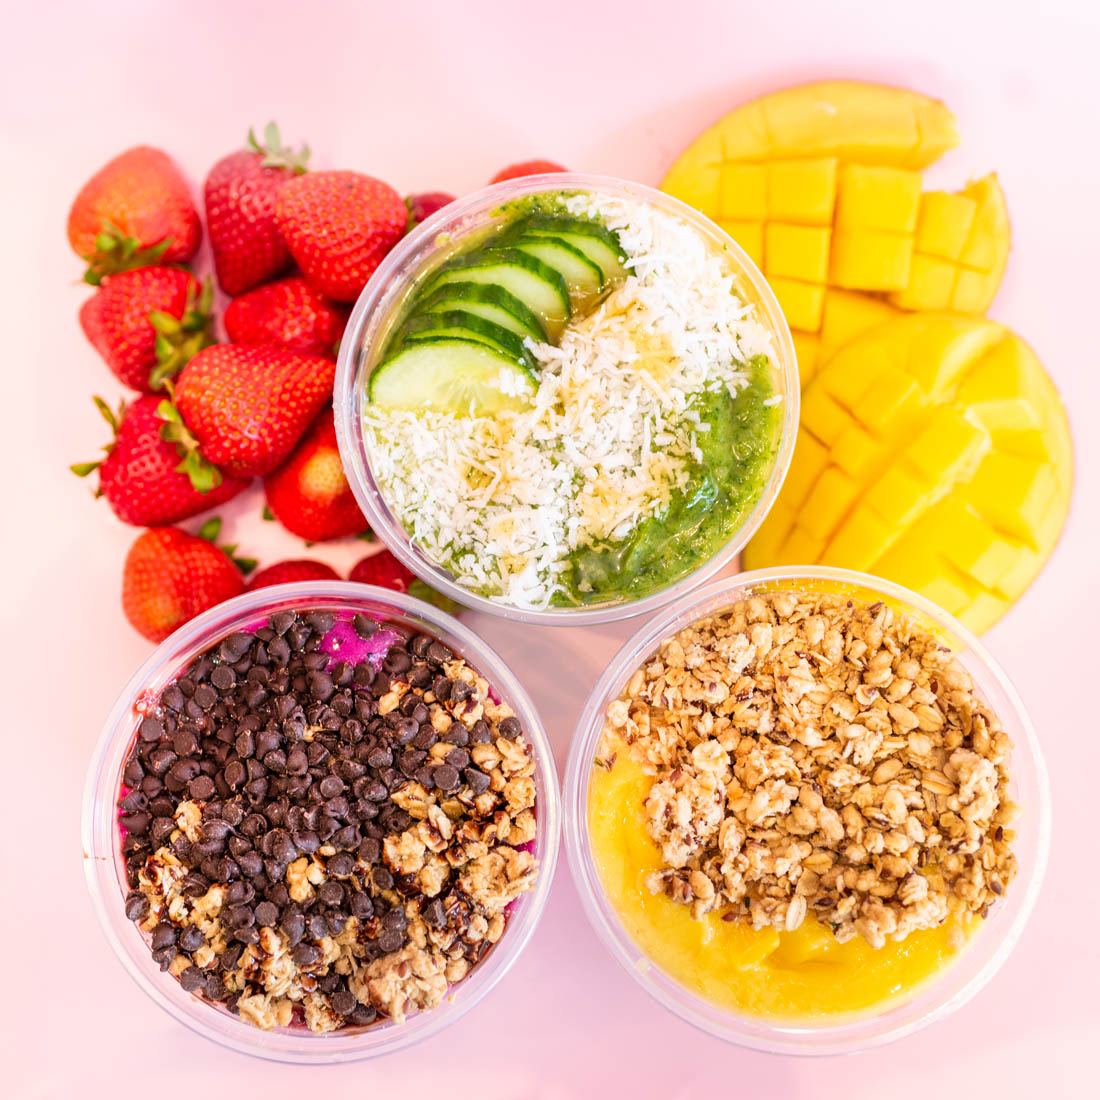 Rush Bowls smoothie bowls nutrition info in Poughkeepsie, NY.